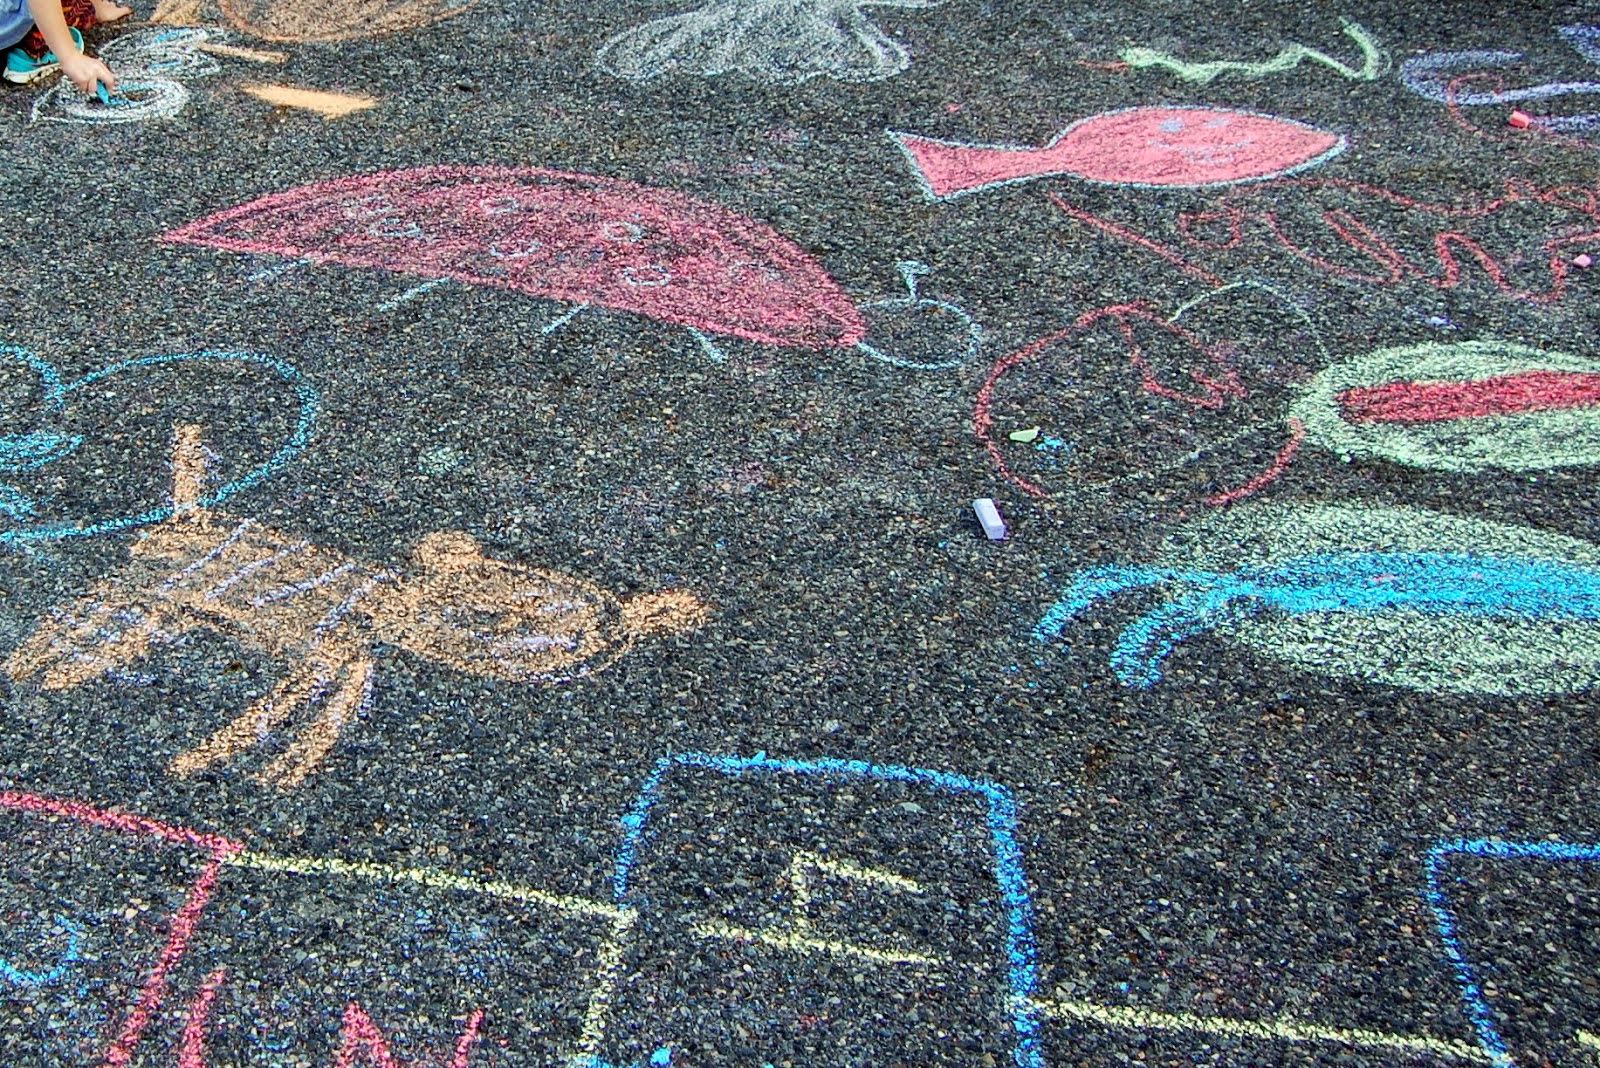 chalk was available to be creative